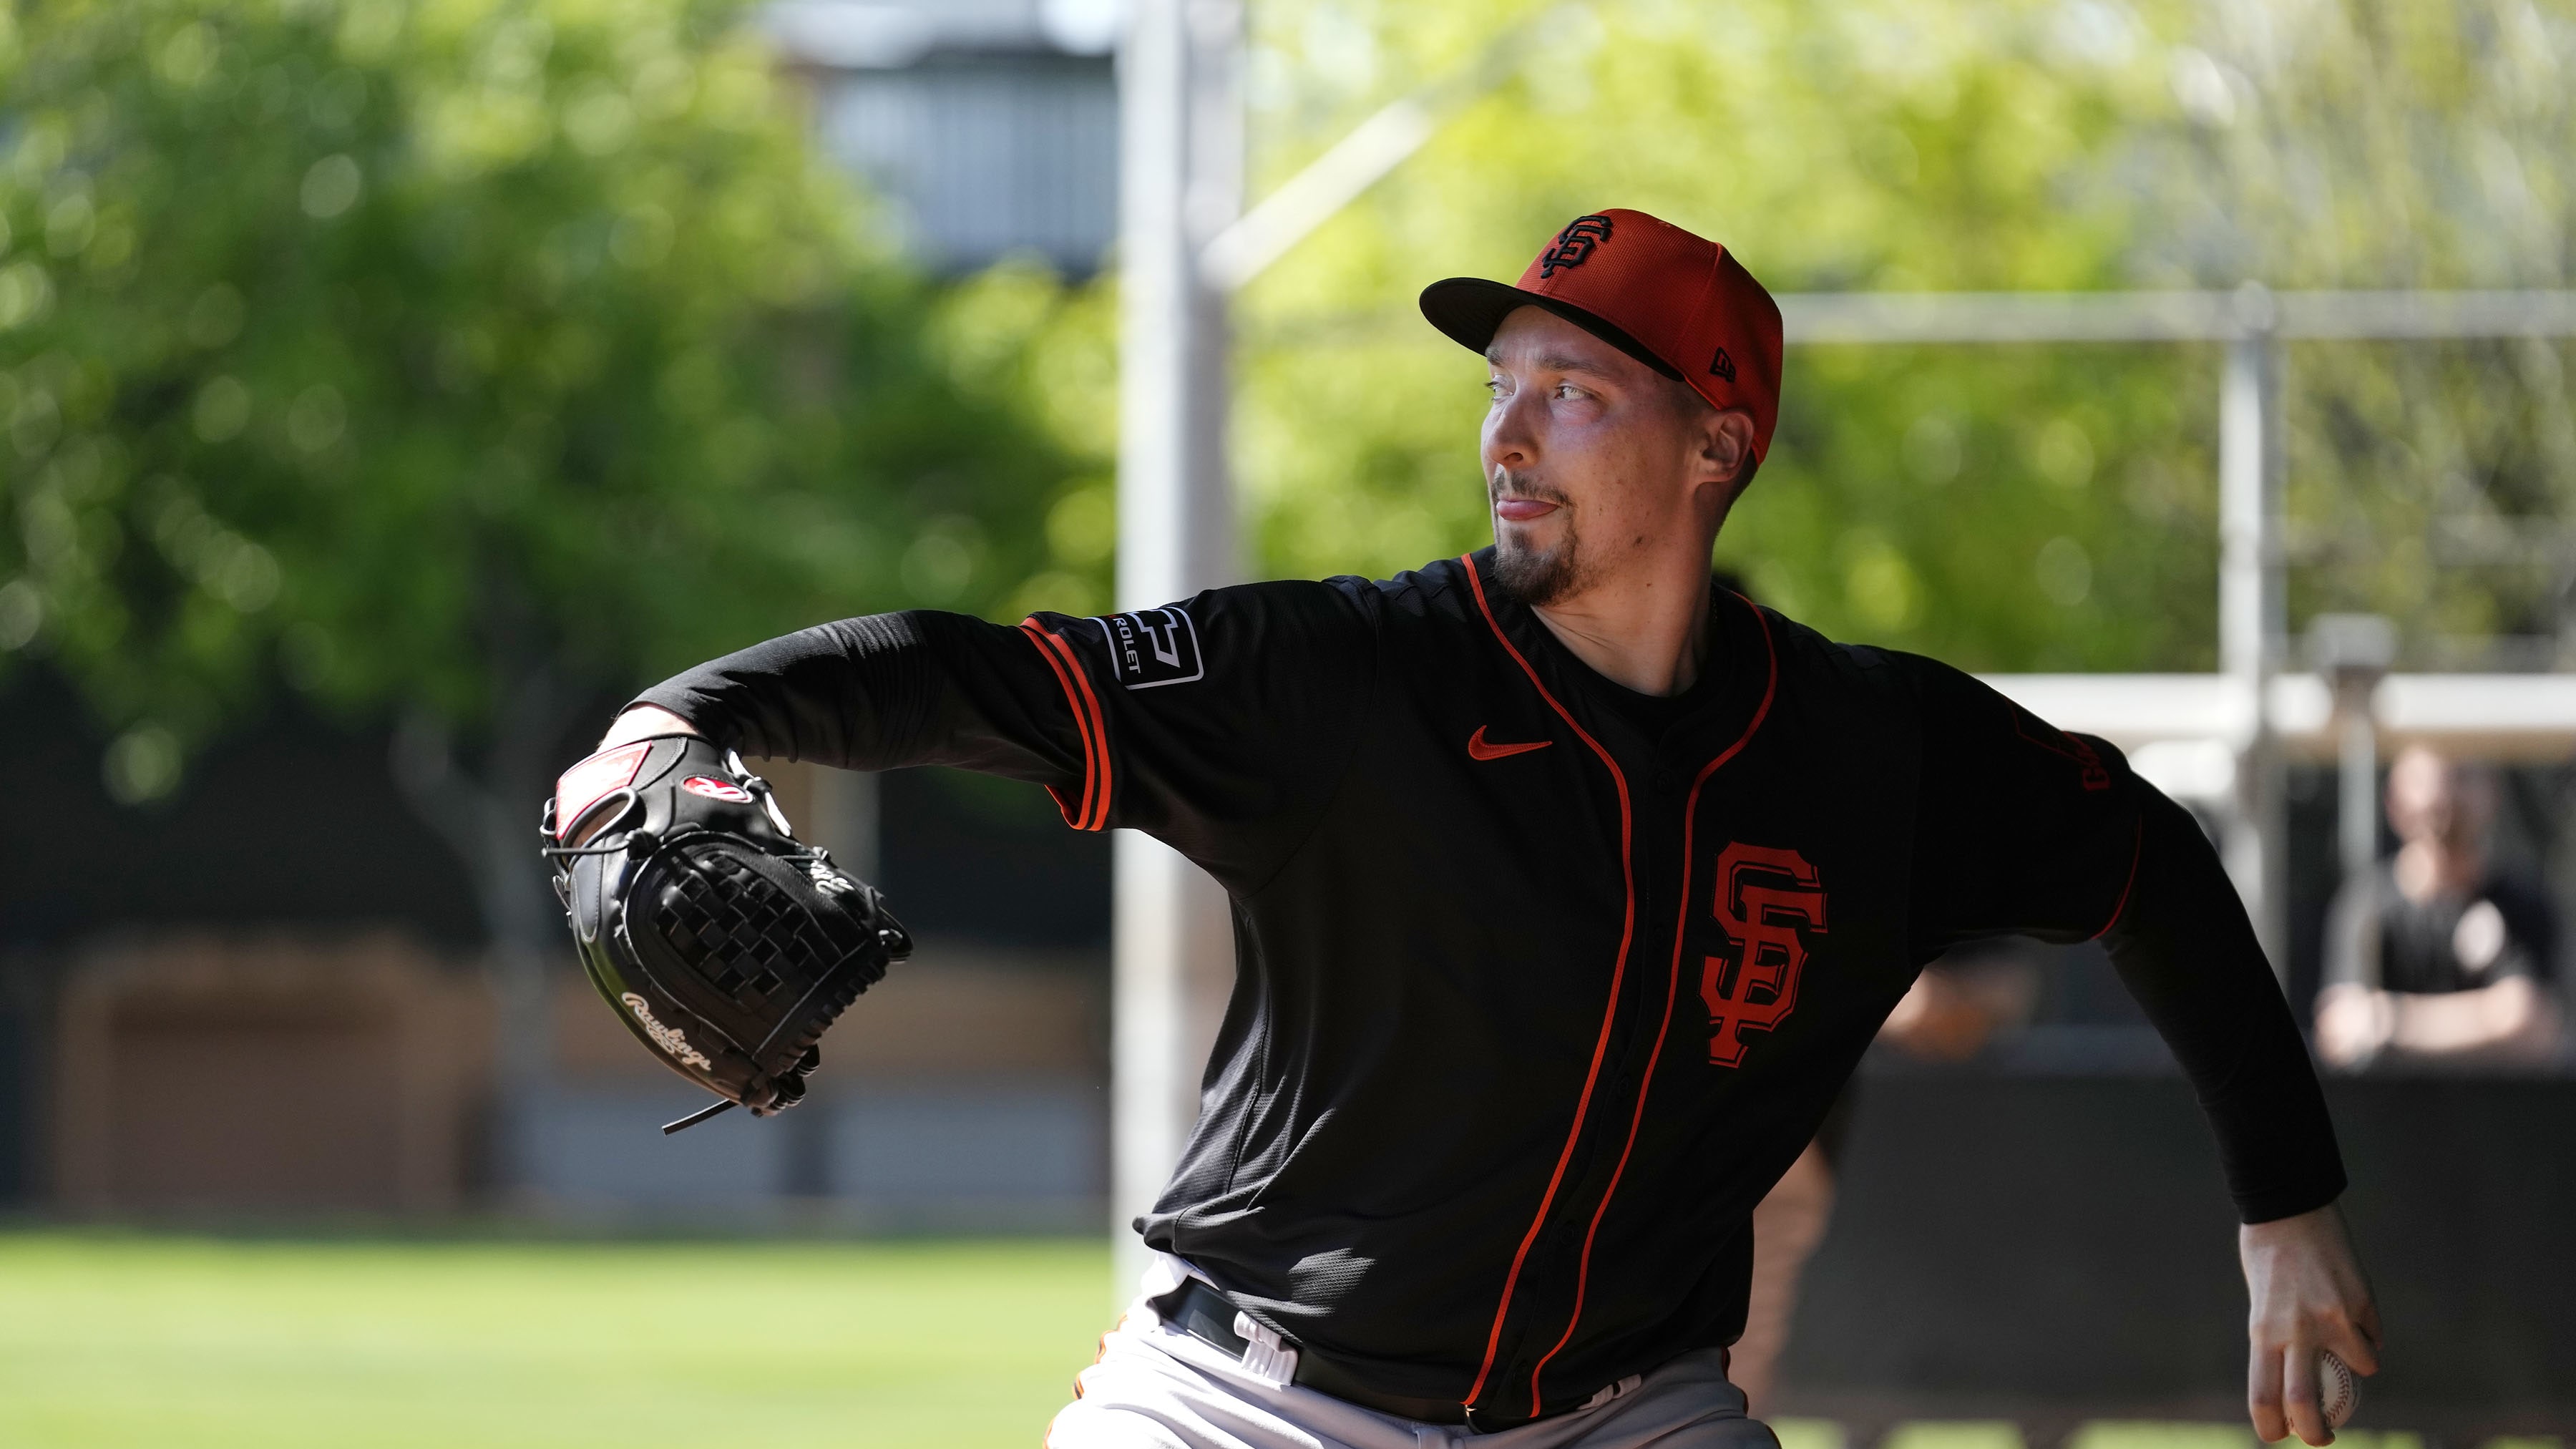 2023 NL Cy Young Award winner Blake Snell warms up at San Francisco Giants Spring Training camp in Scottsdale, Arizona.